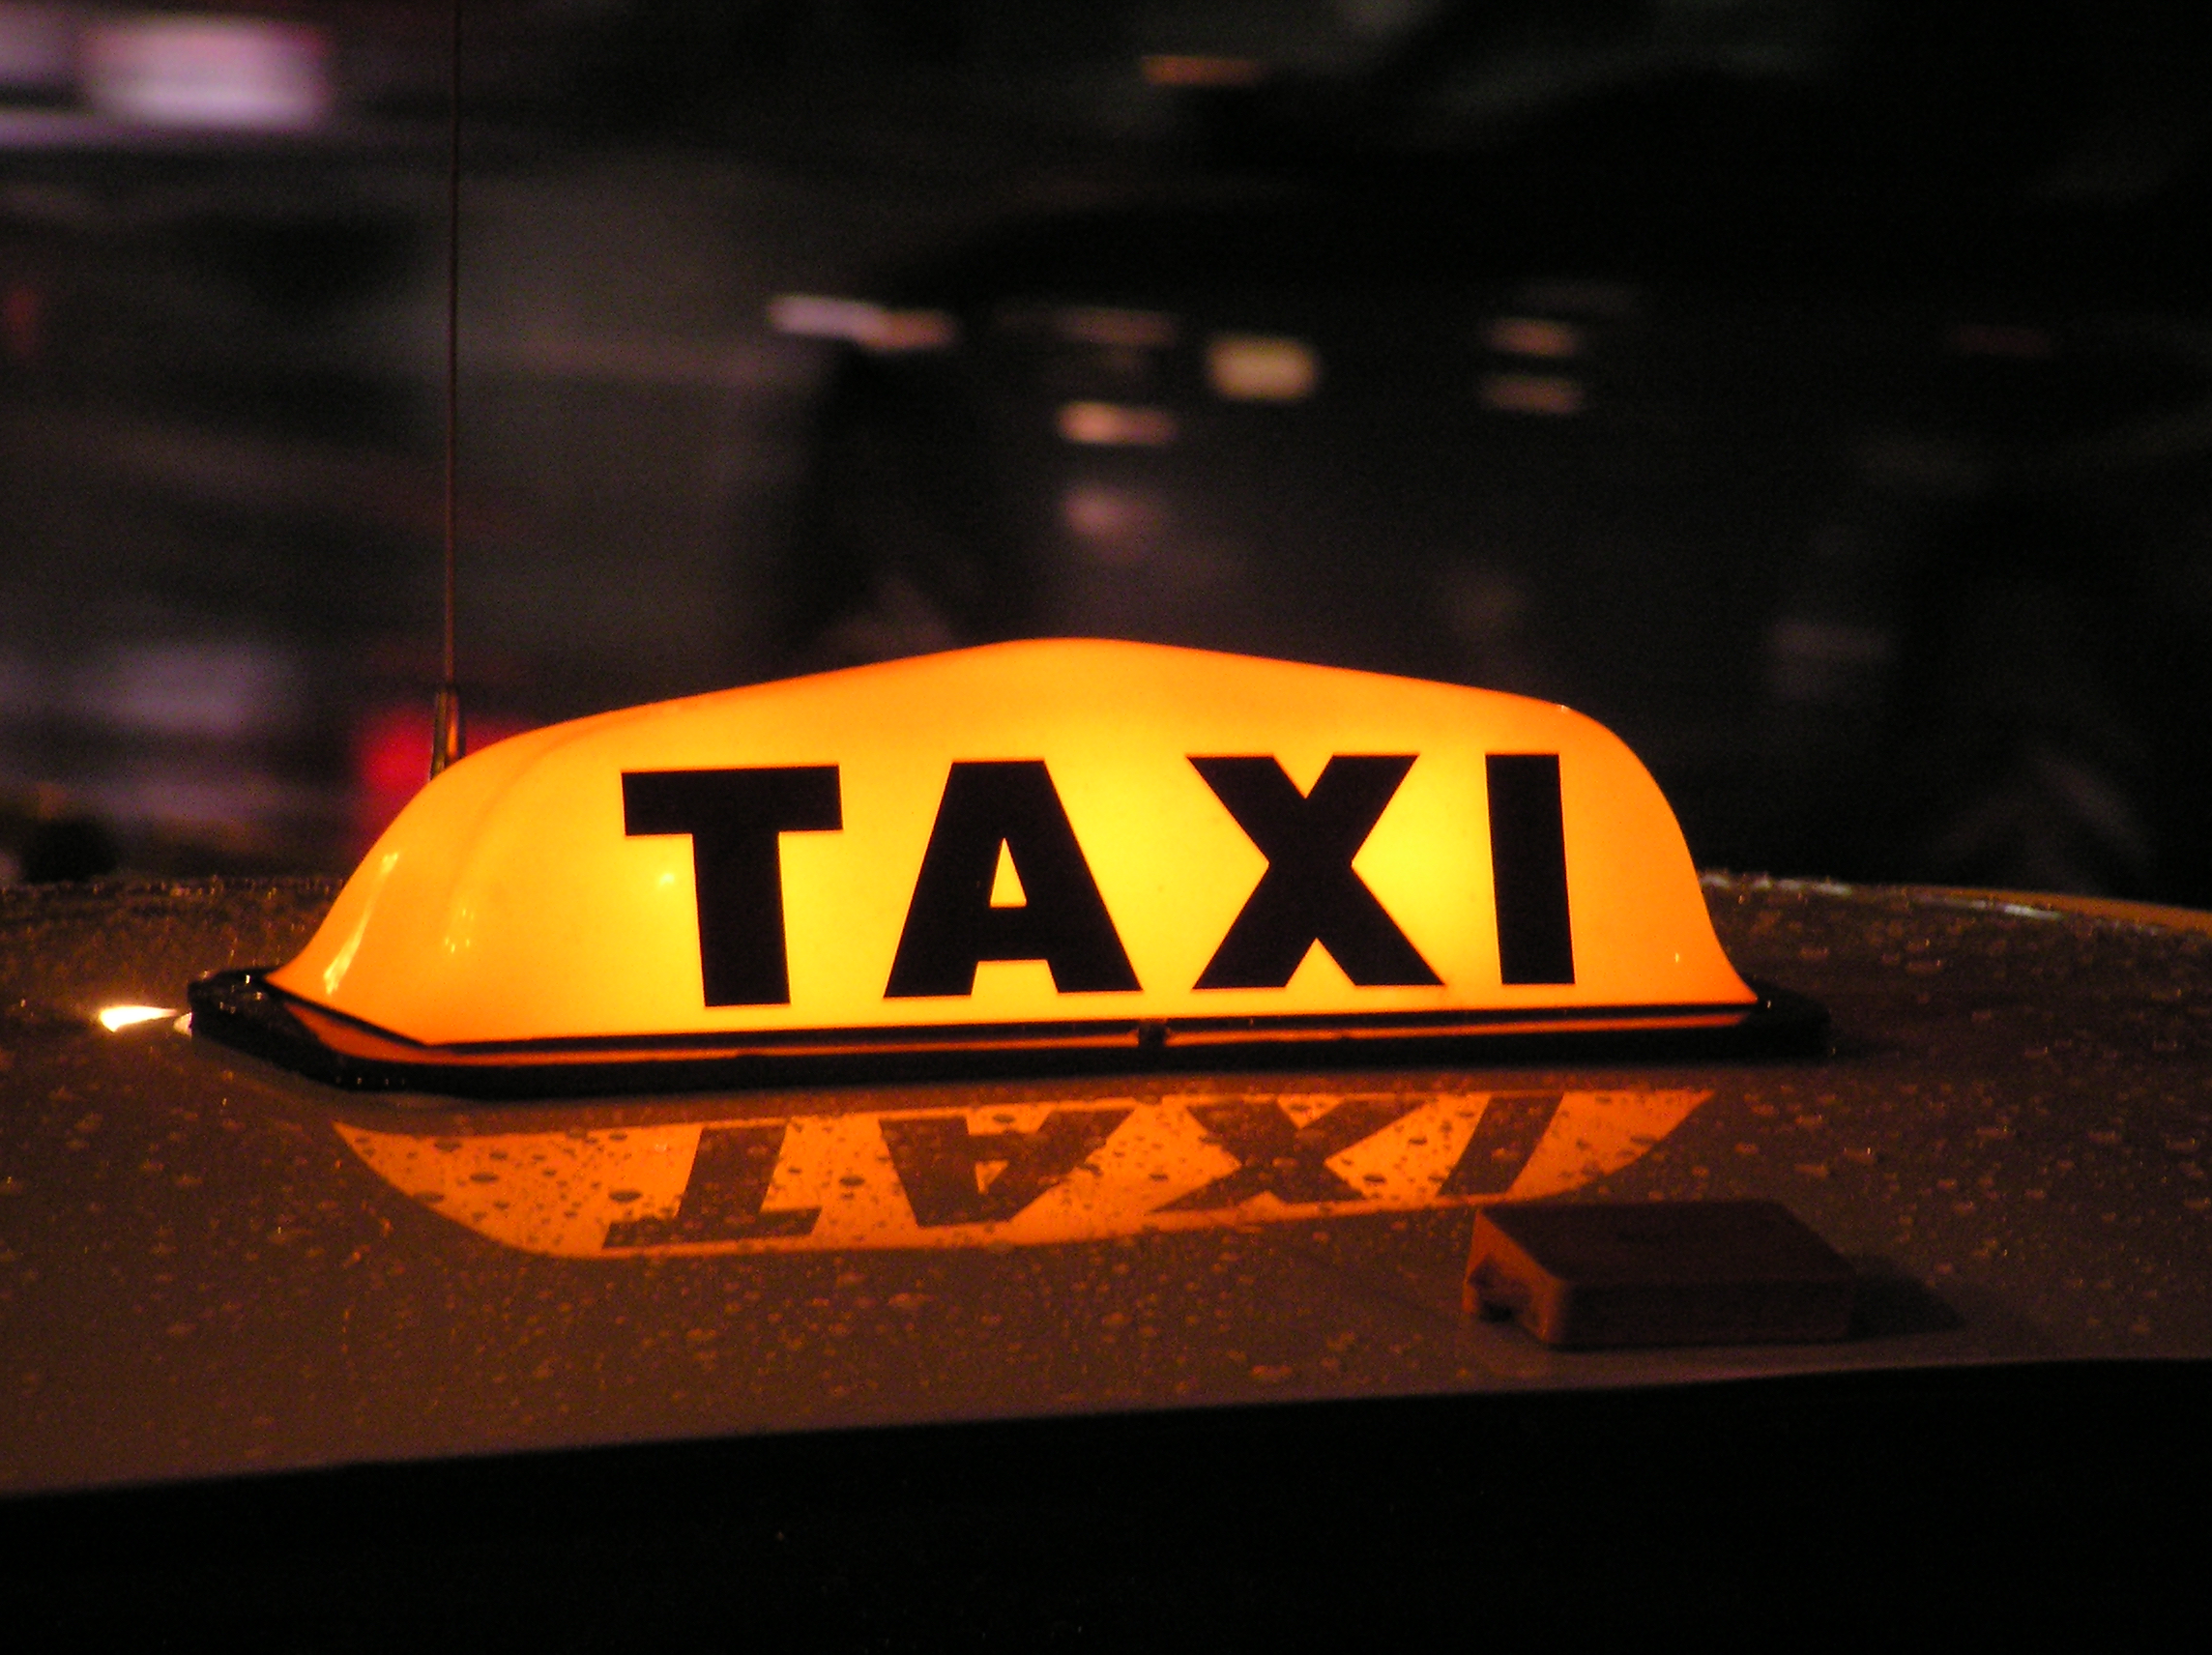 Court of appeals panel rules in favor of San Francisco taxi drivers who bought medallions after 2010